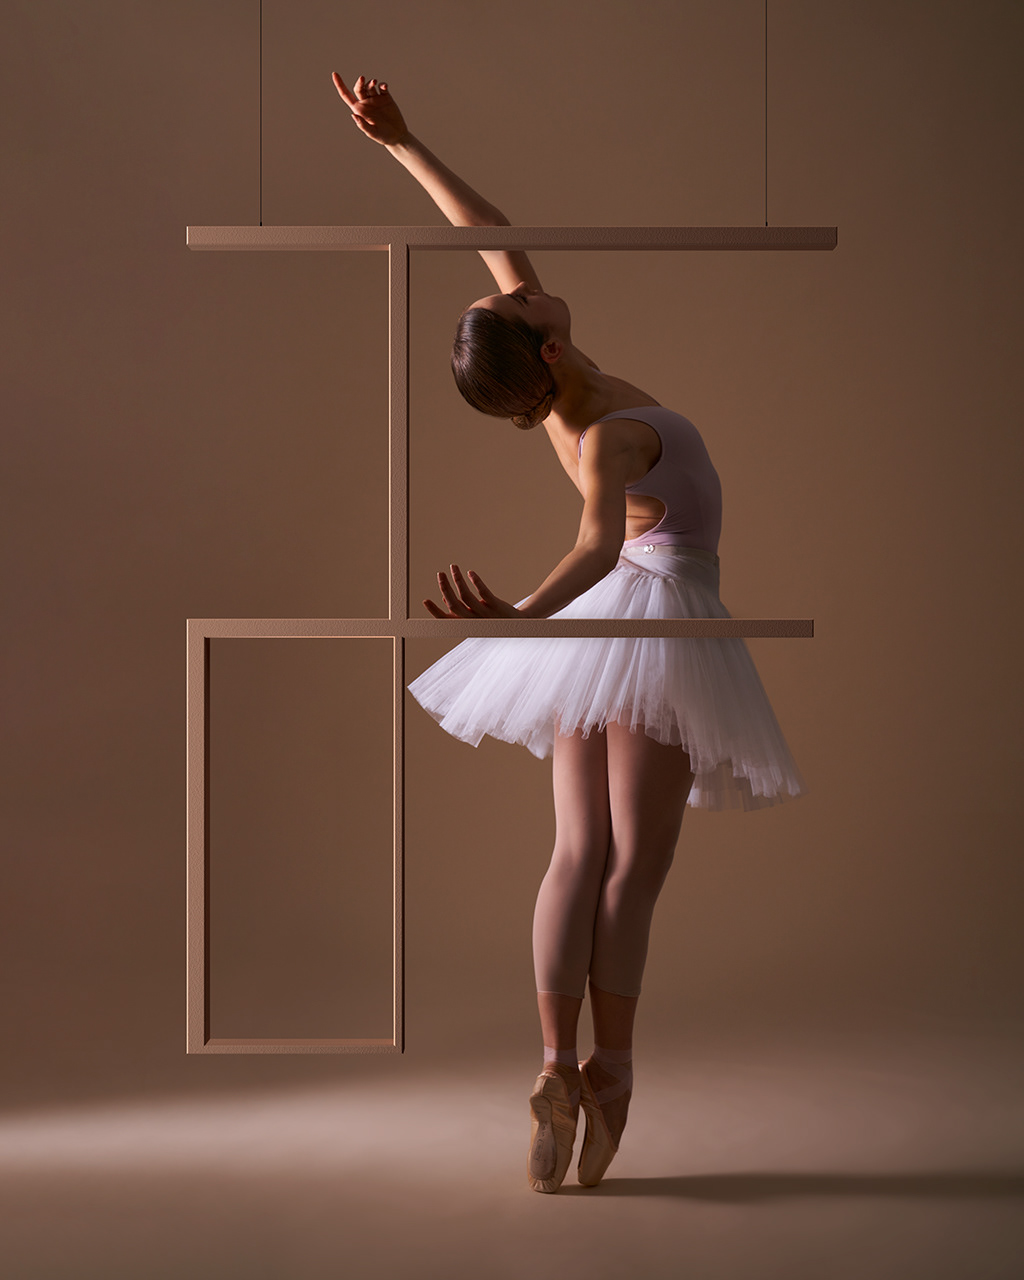 3D CGI DANCE   dancing dancing girl letter photo Photography  Typeface typography  